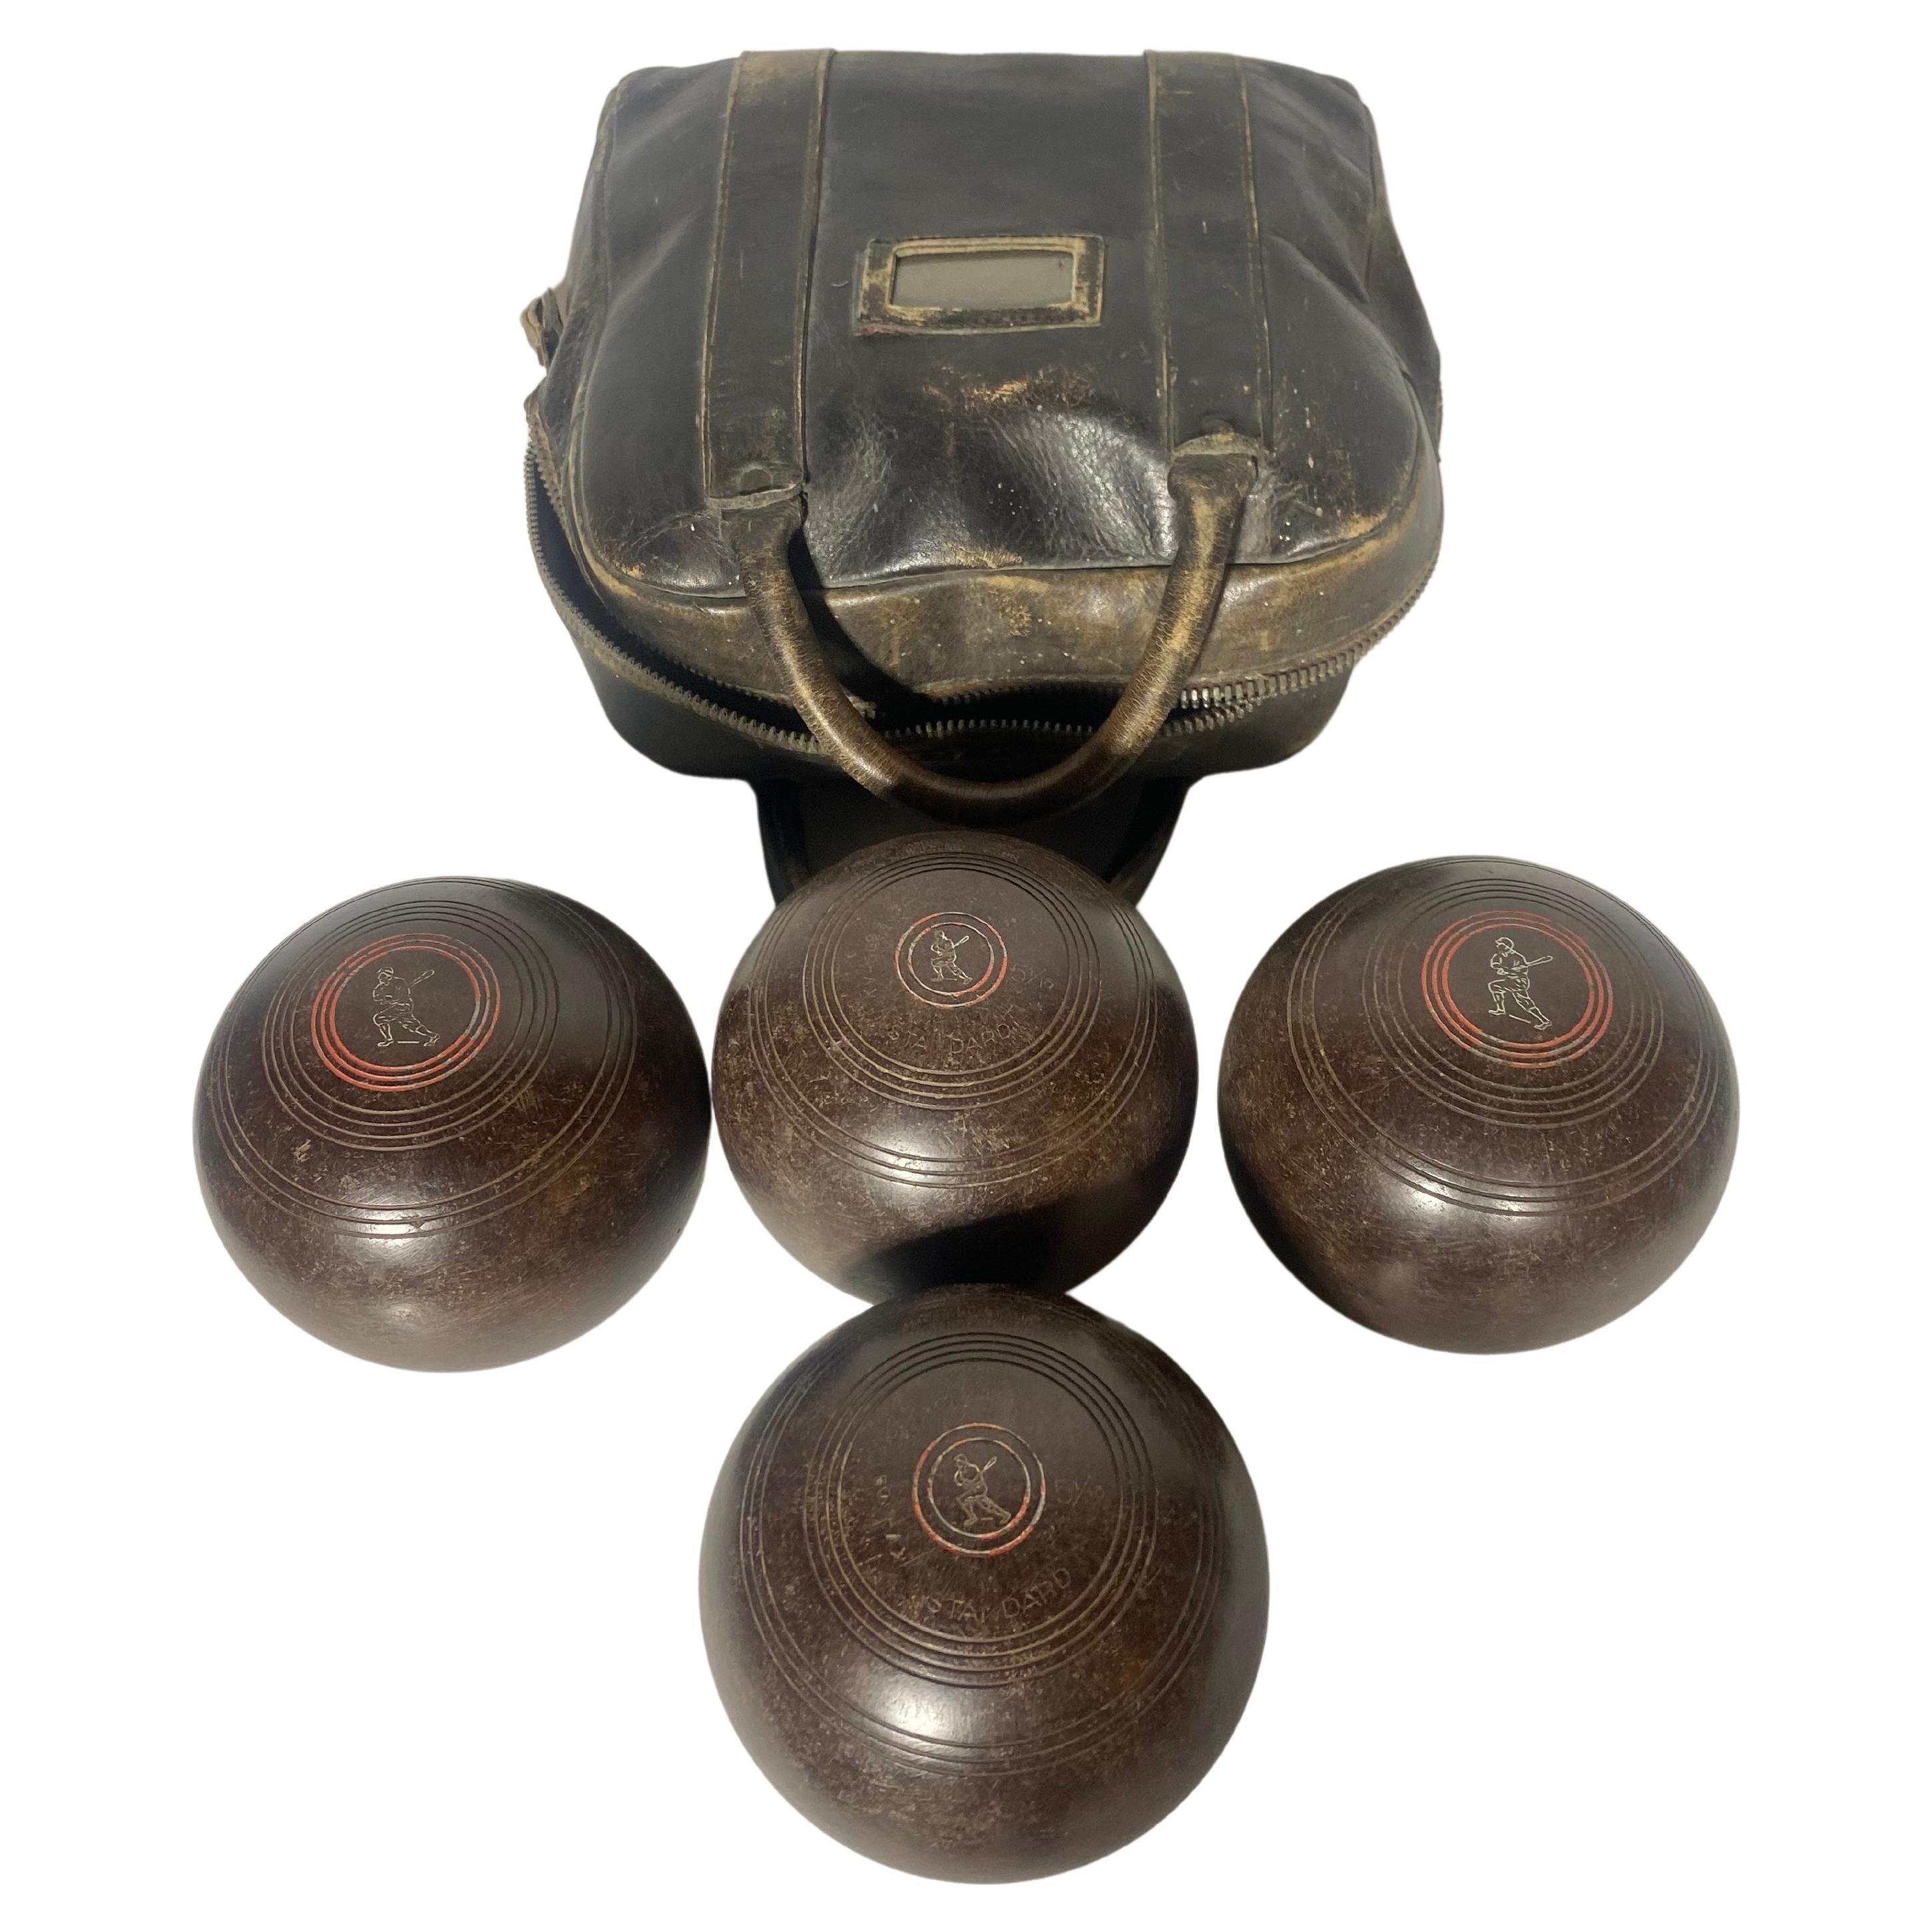 Industrial 1930s /40s W.D. Hensell & Sons Bocci (Lawn) Balls with original leather bag For Sale